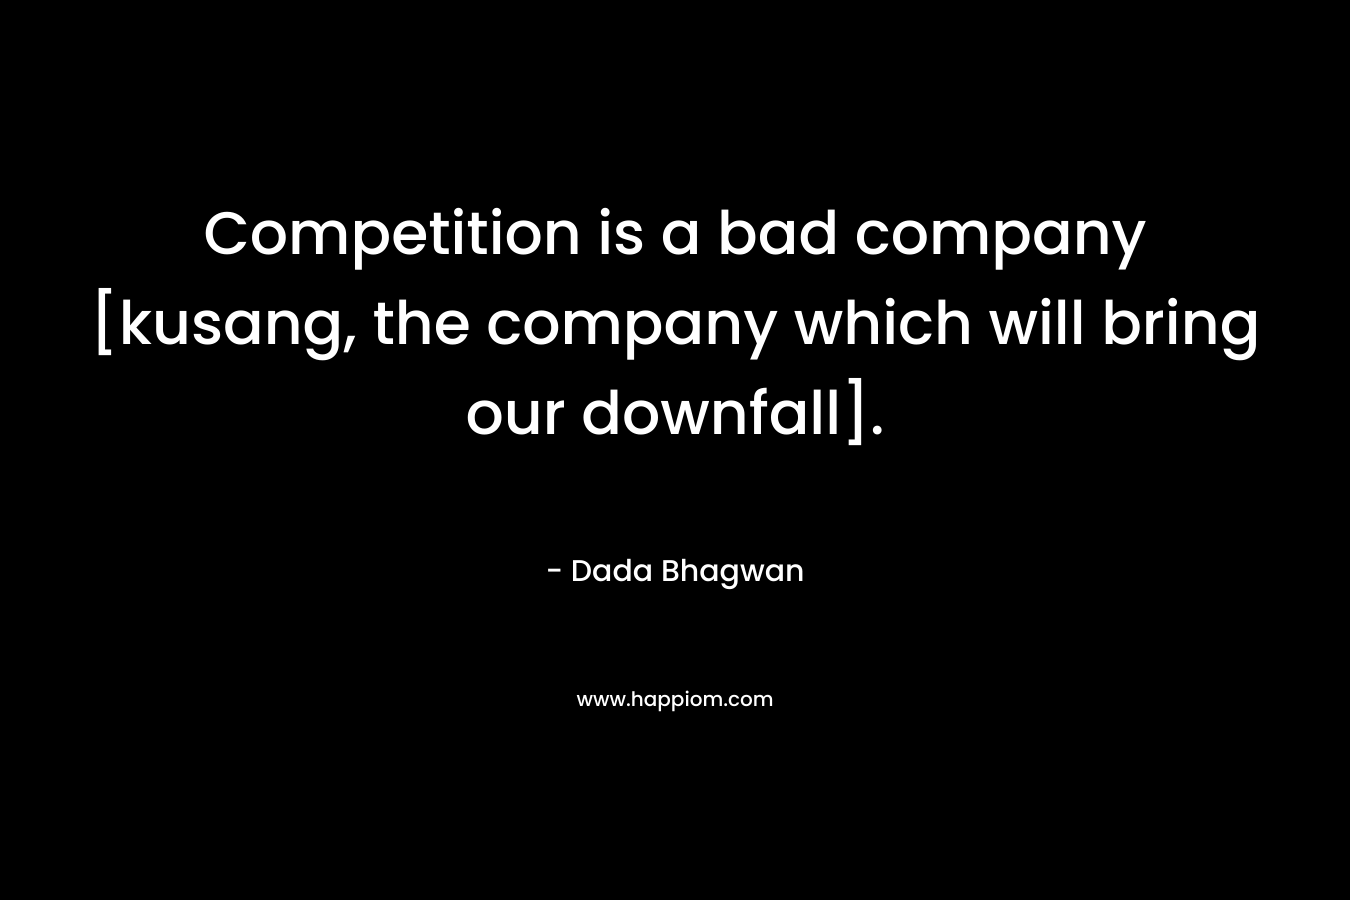 Competition is a bad company [kusang, the company which will bring our downfall]. – Dada Bhagwan